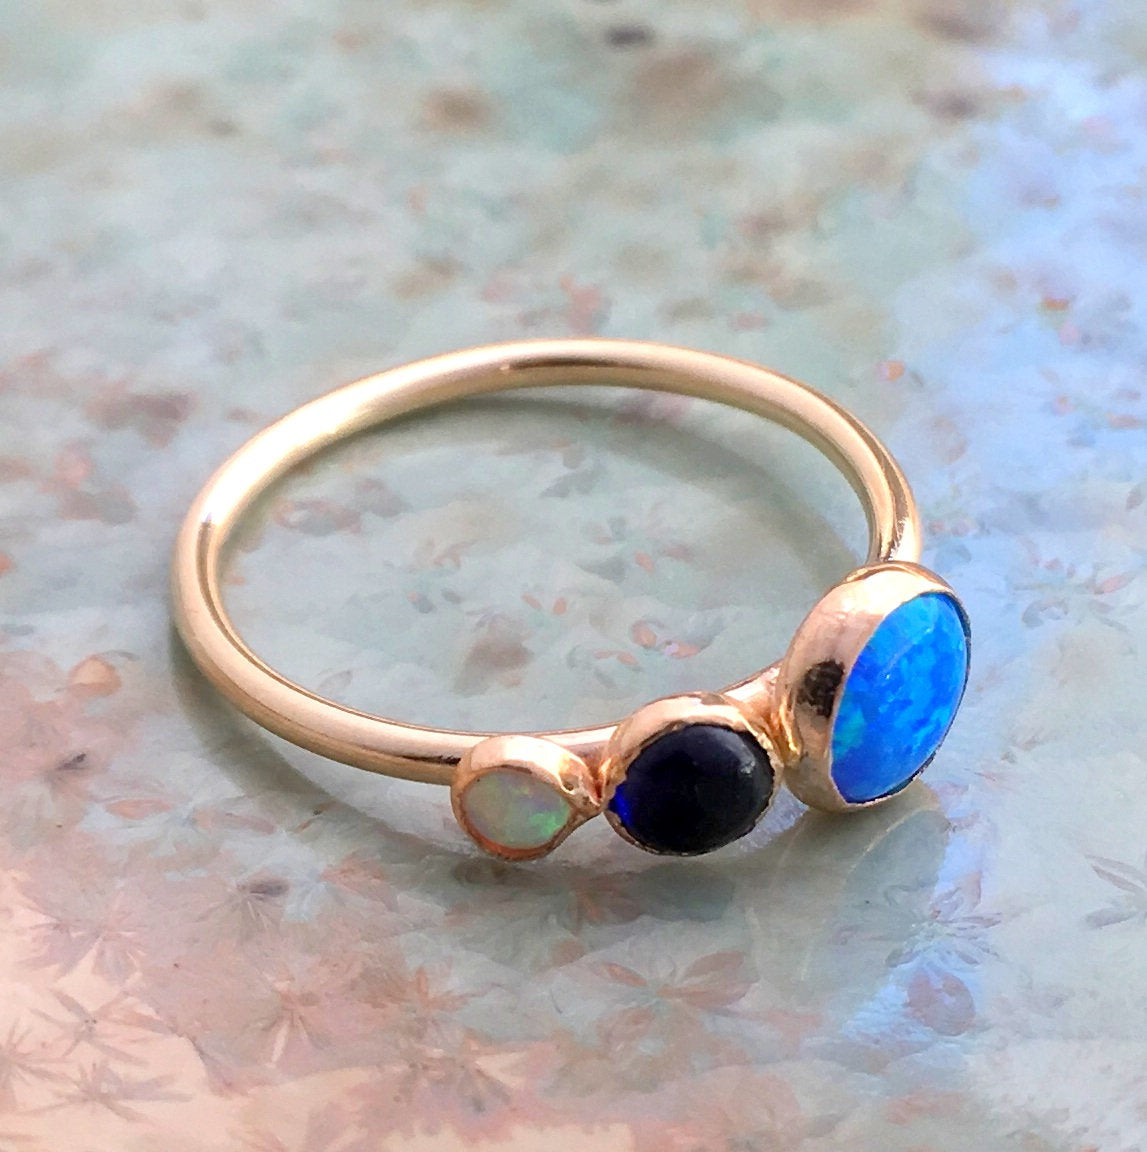 Birthstones ring, custom family ring, stacking ring, Mothers ring, Gold ring, Gold Filled ring, multi stone ring - Say anything R2559-1